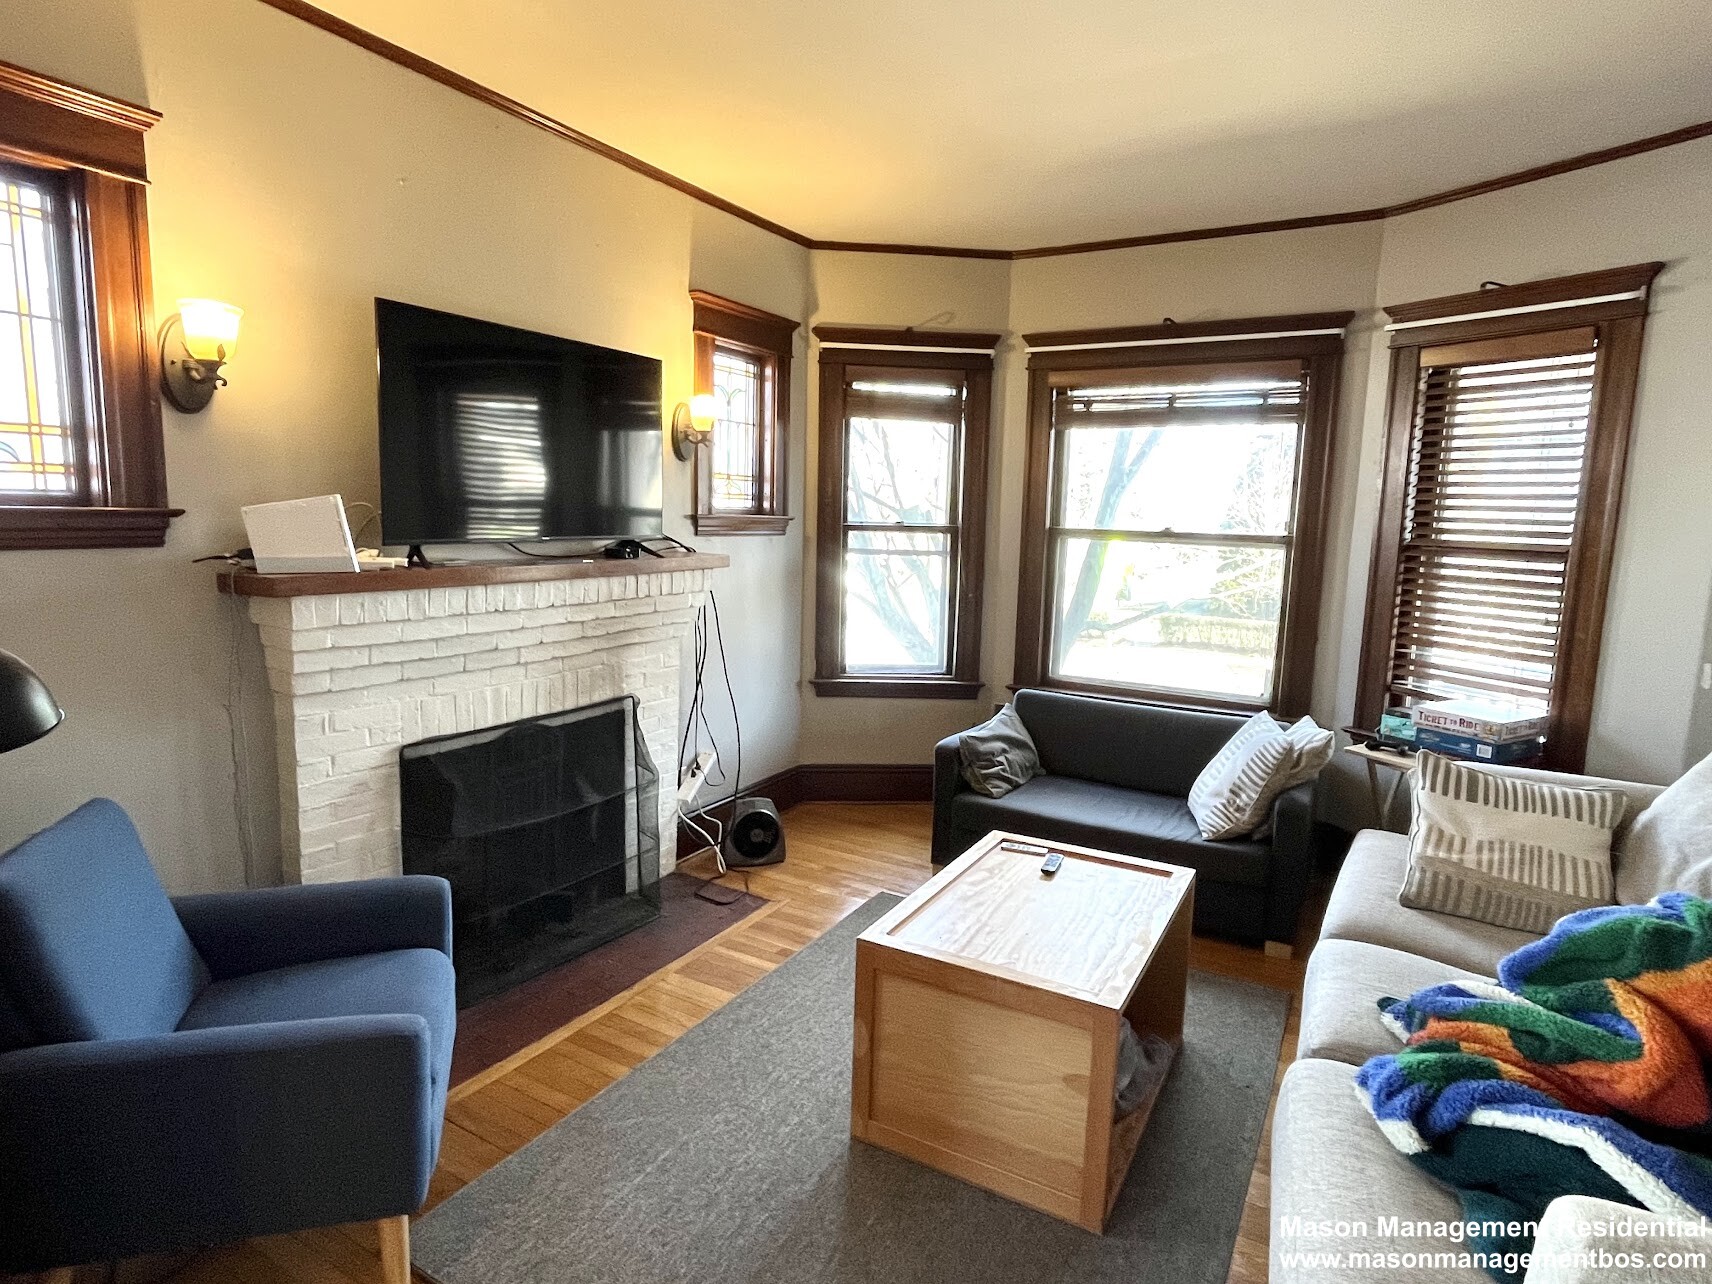 Photos of apartment on Hilltop Rd.,Watertown MA 02472